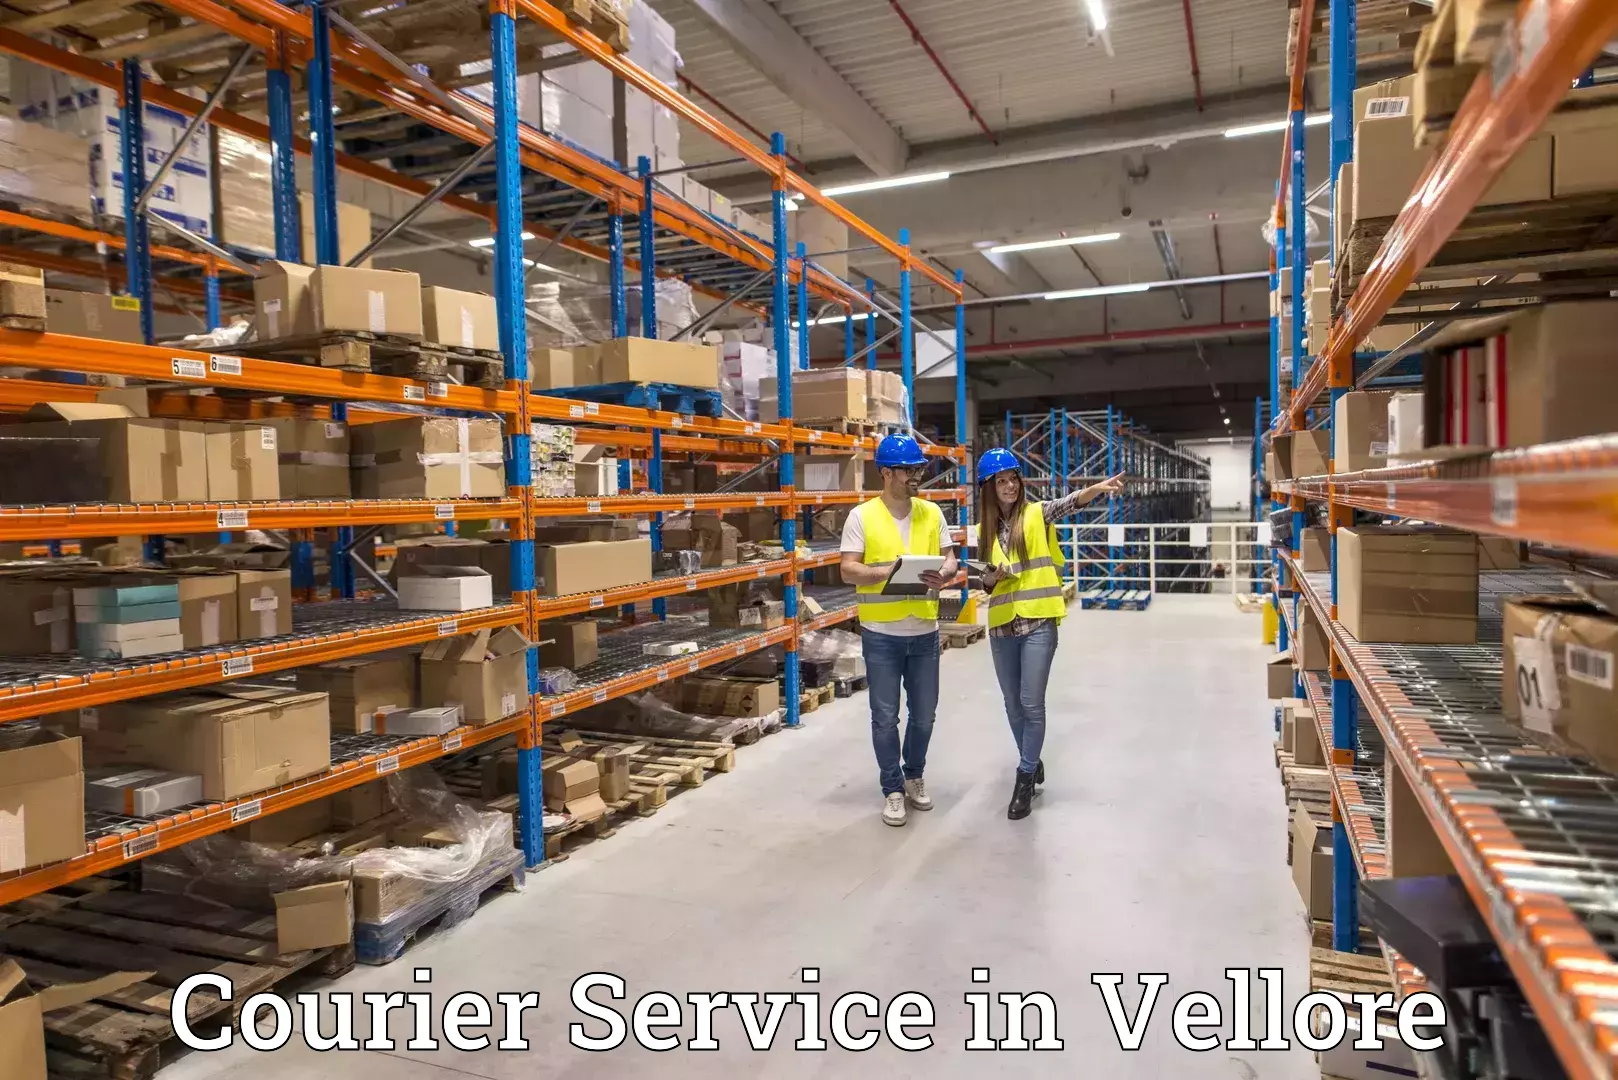 Parcel service for businesses in Vellore